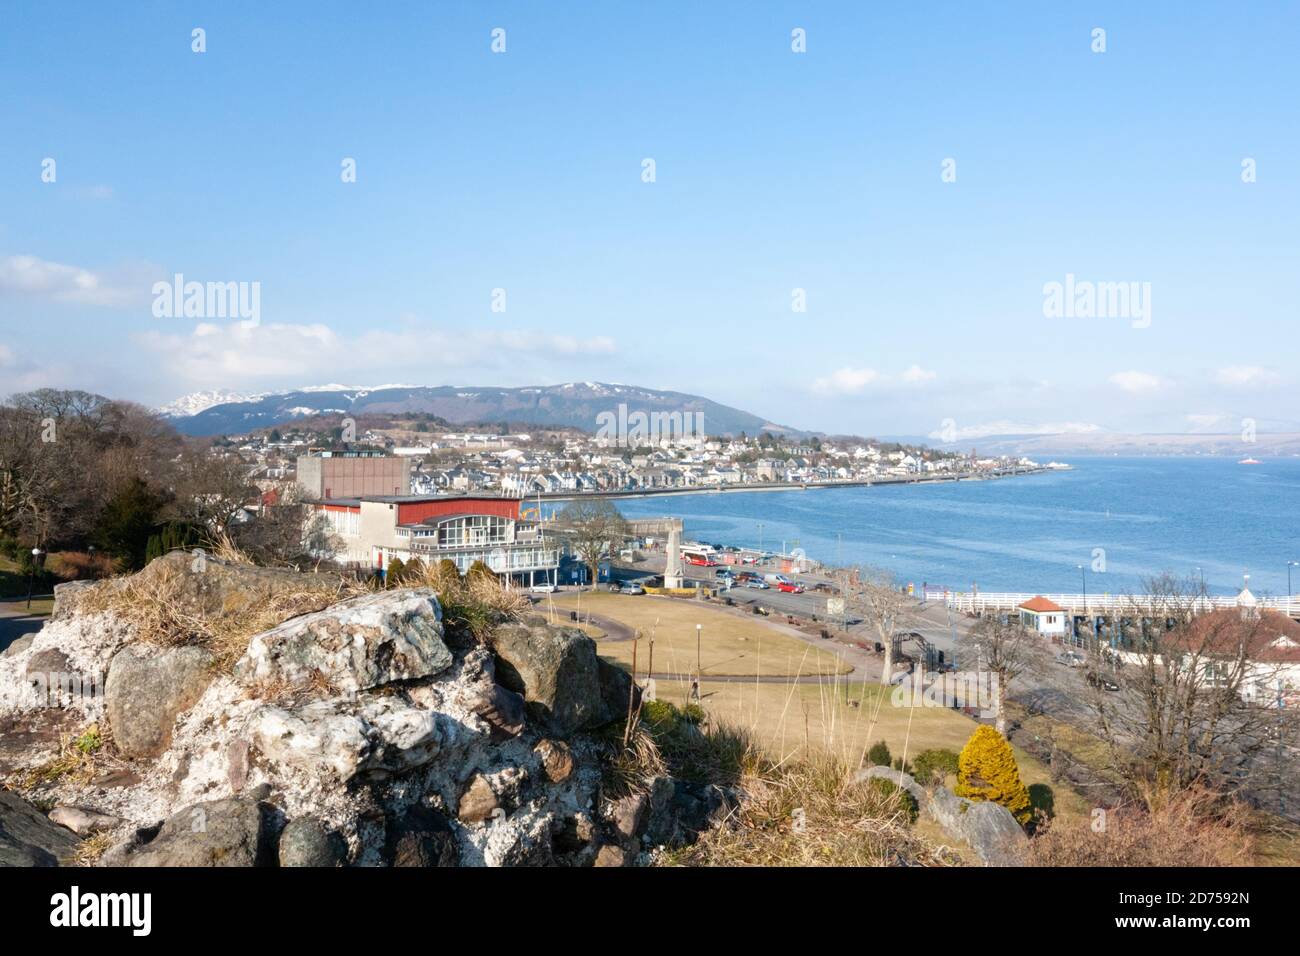 Overview of Dunoon, East Bay and Alexandra Parade on a sunny day, Scotland, UK, March 2010 Stock Photo